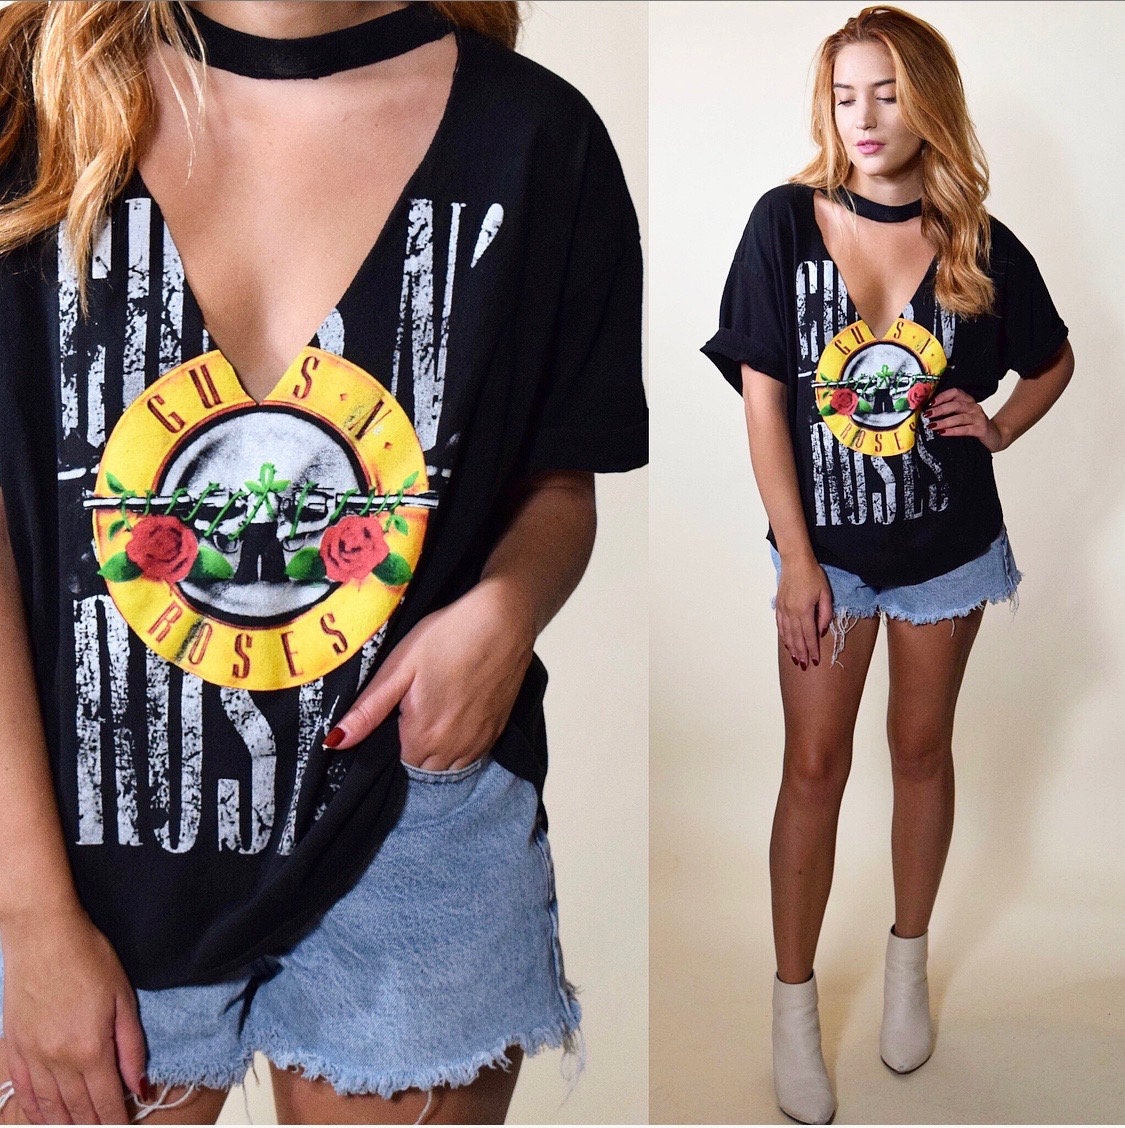 Guns N Roses hand distressed one of kind out deep v neck shirt women's oversized L-XL